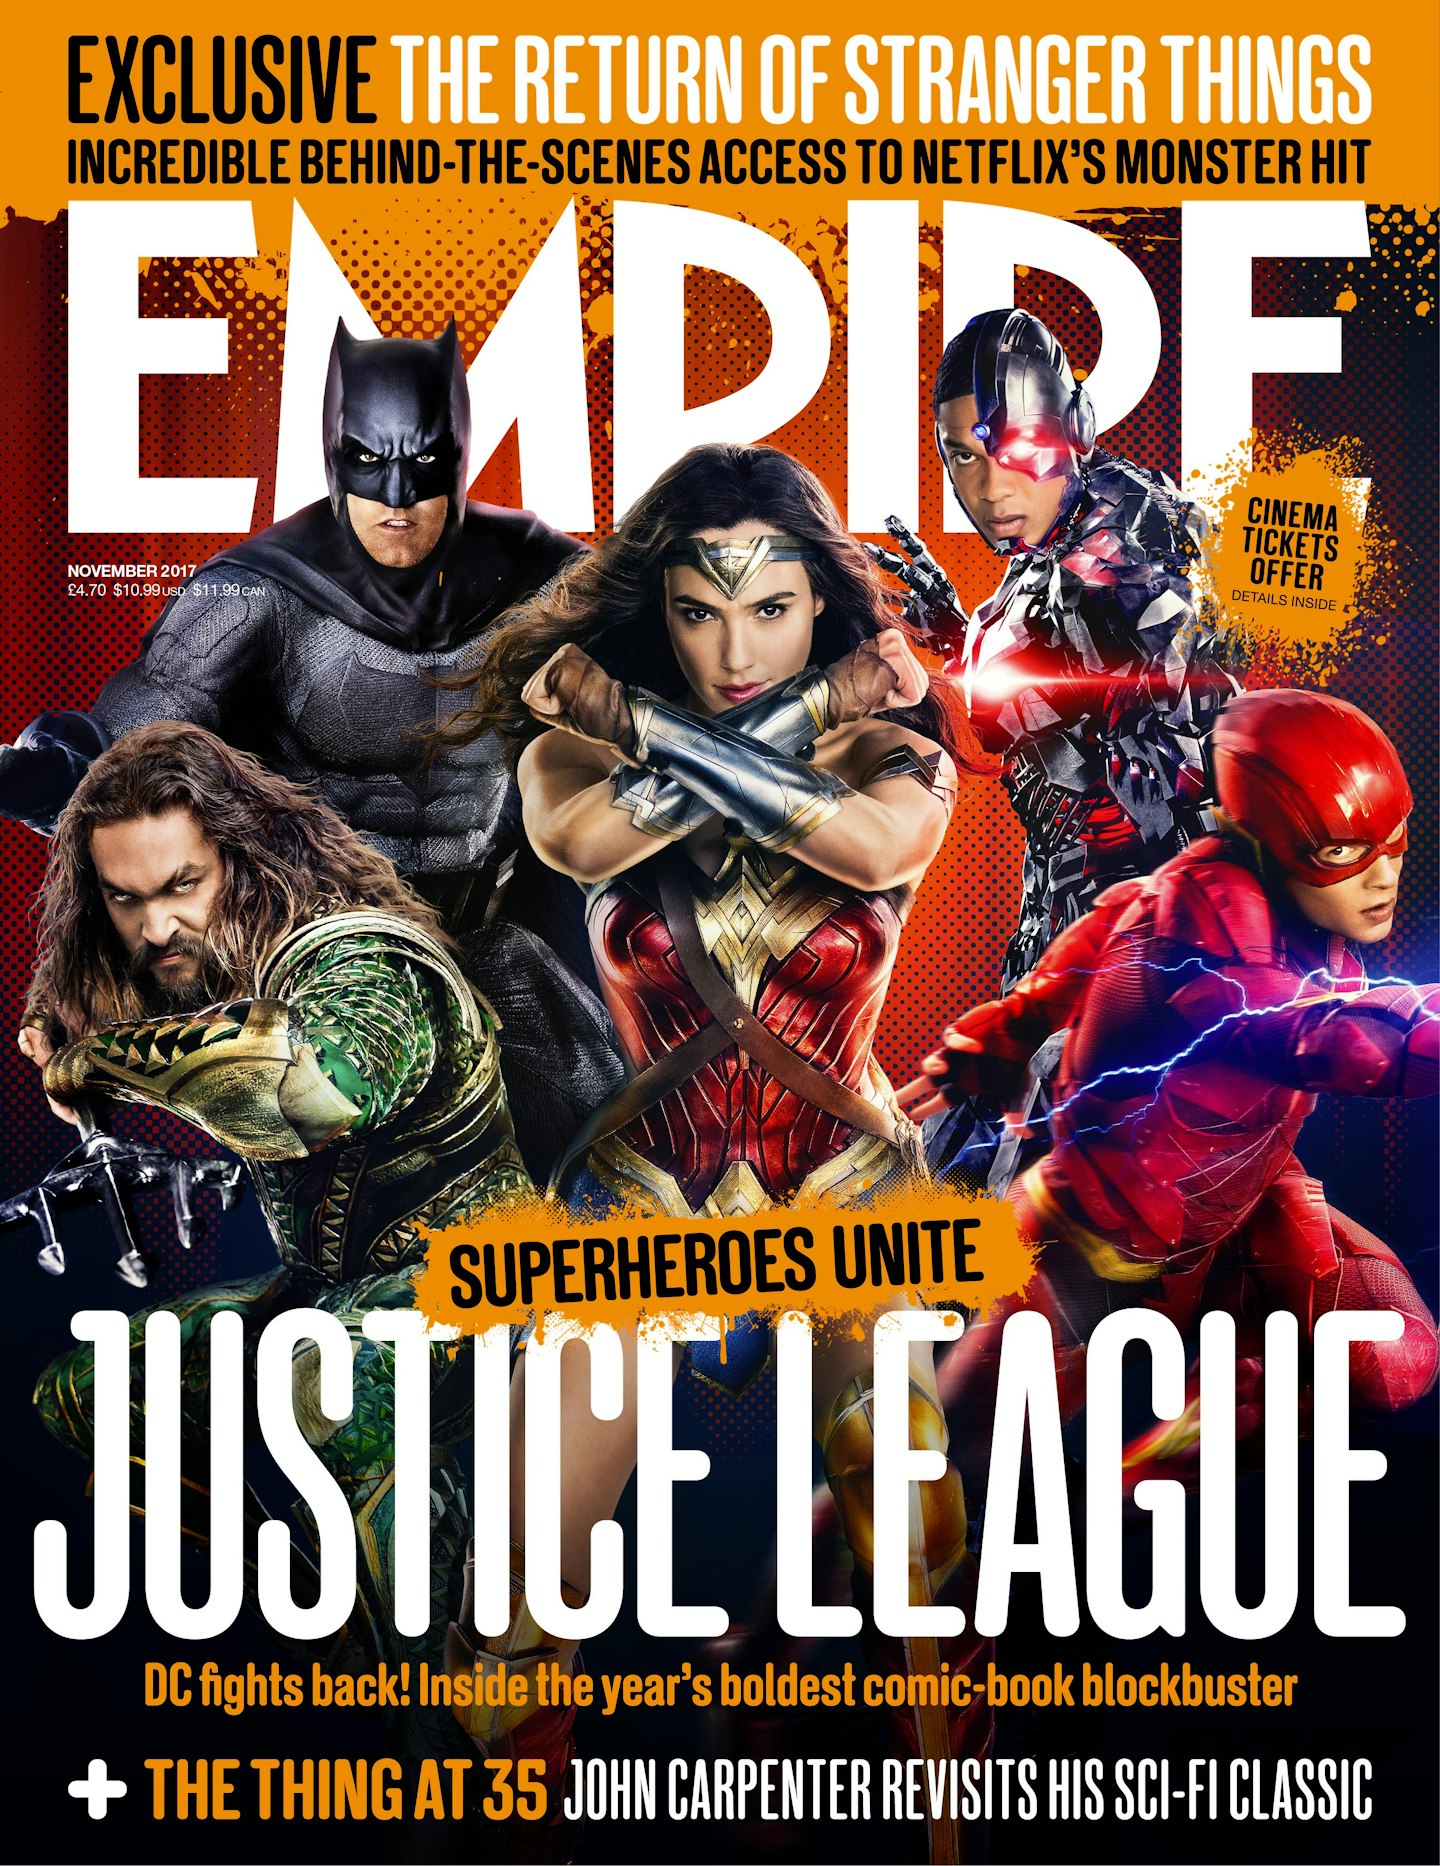 Empire issue preview